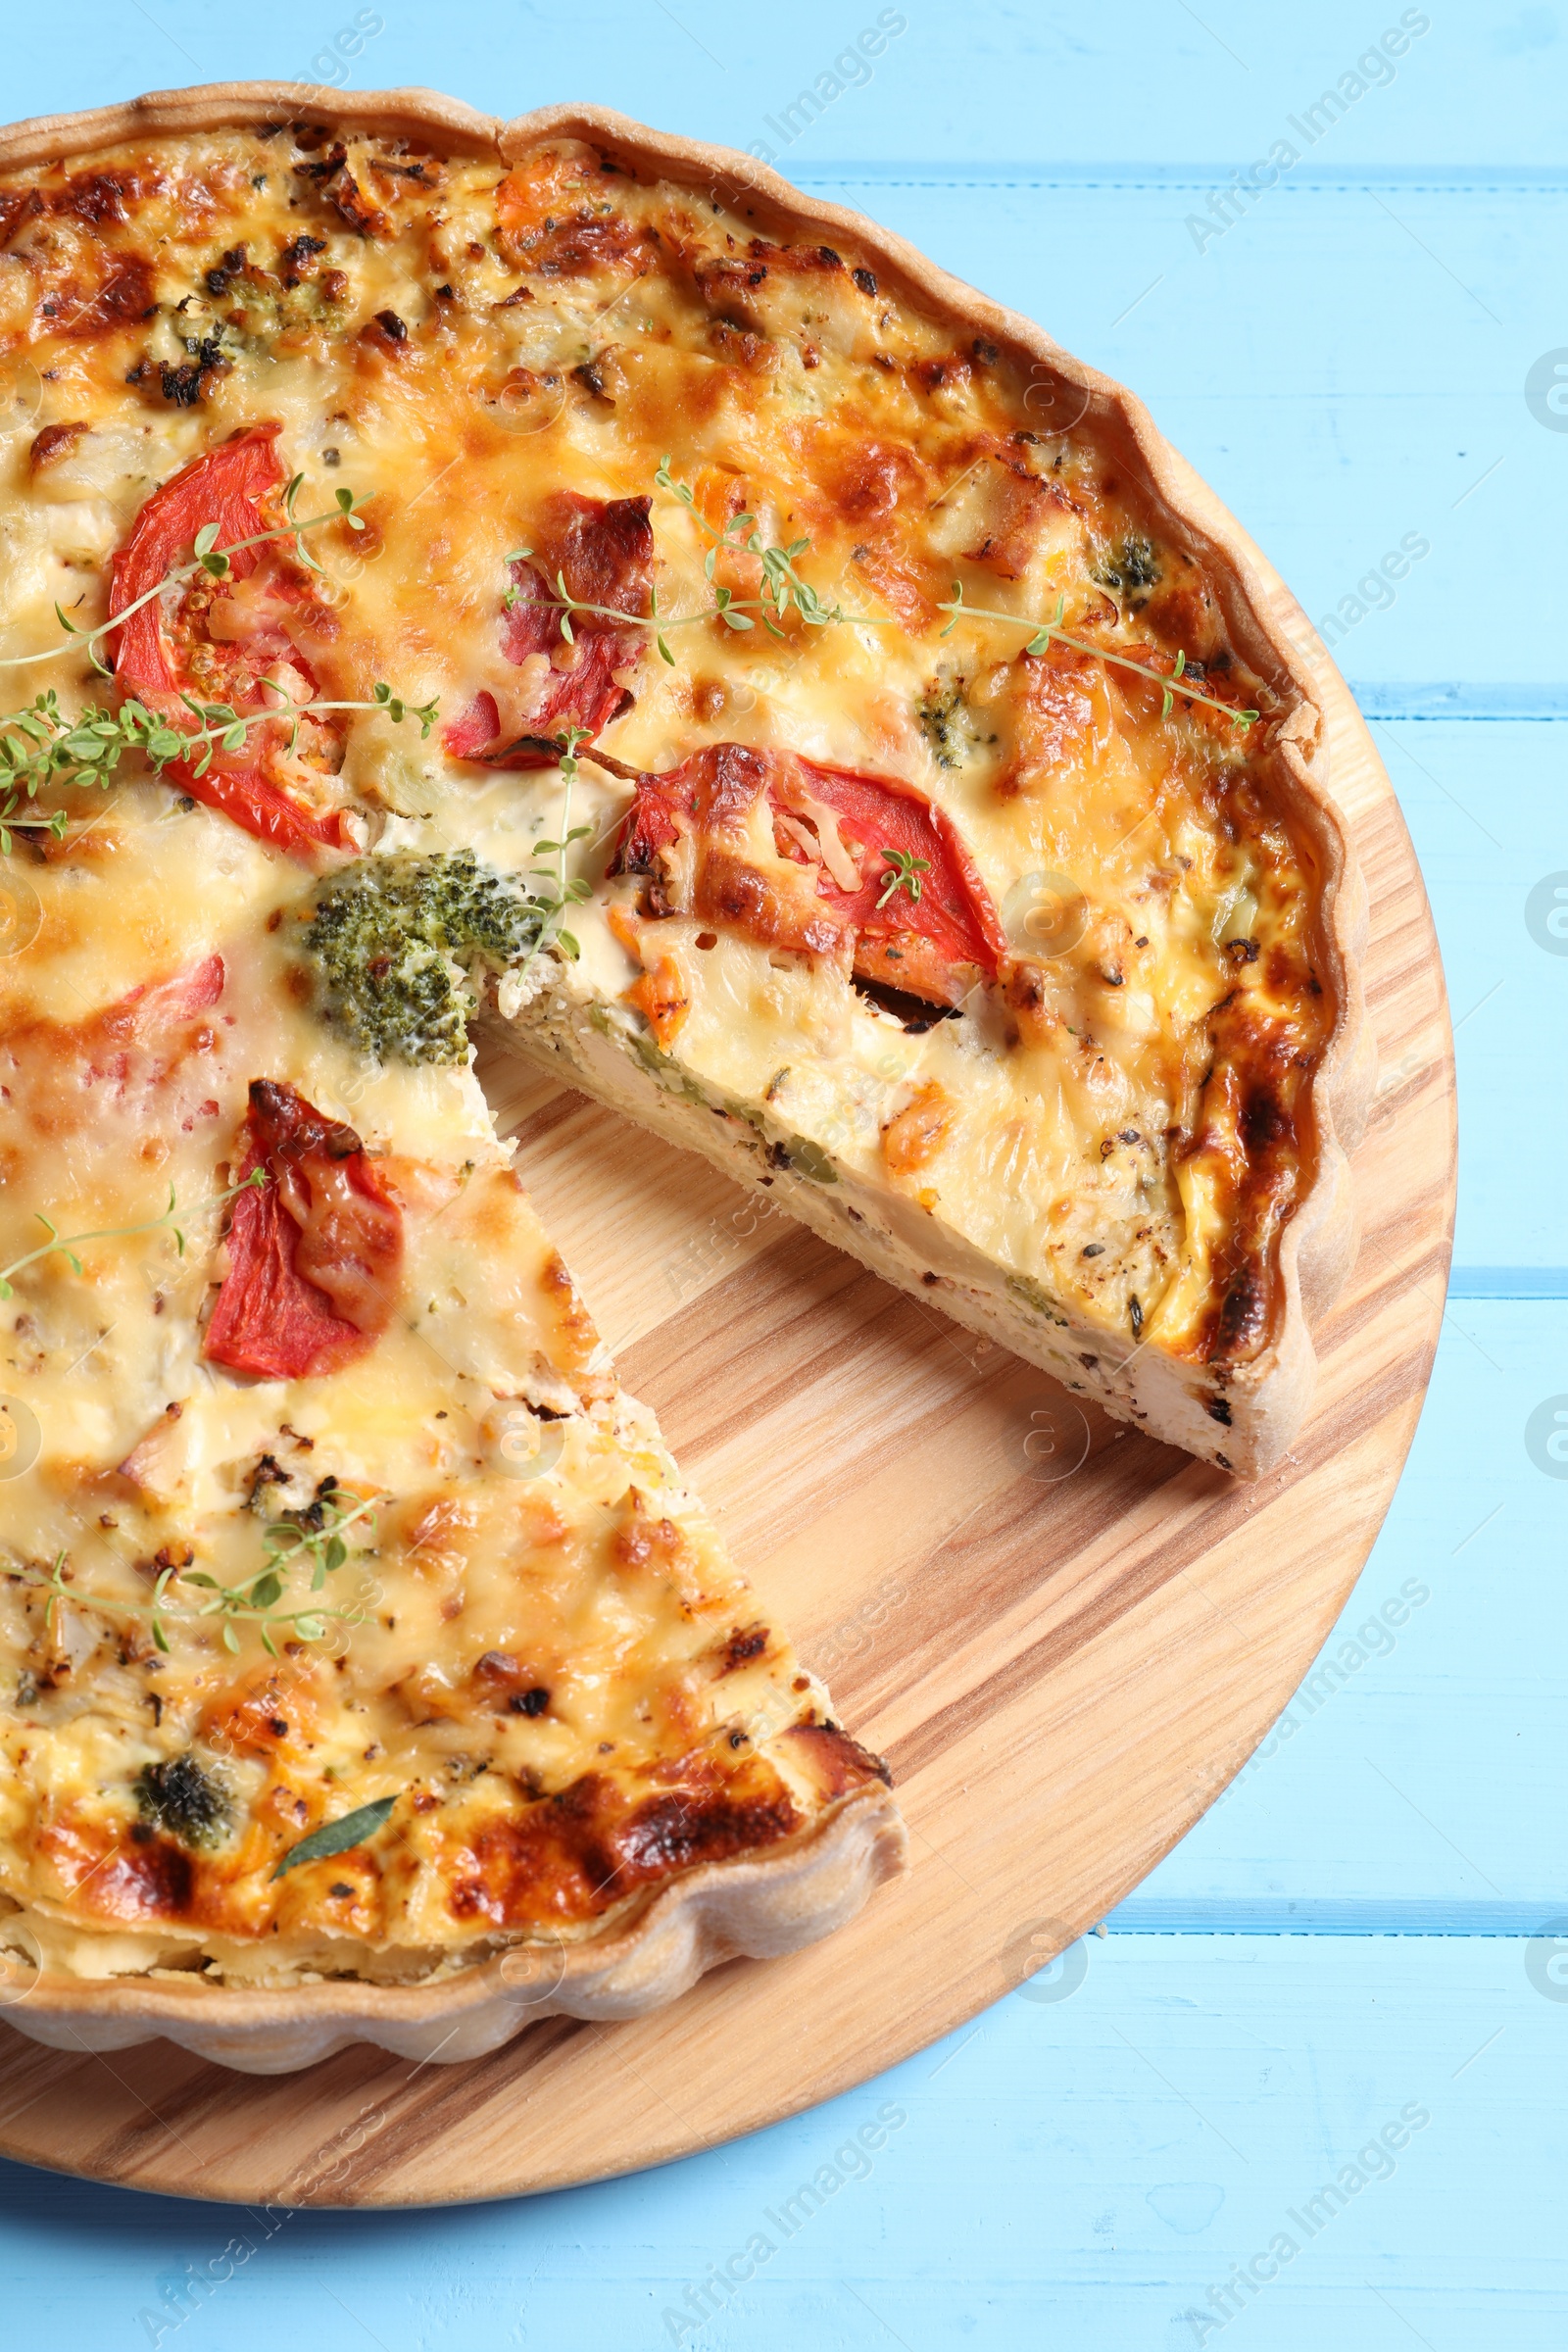 Photo of Tasty quiche with tomatoes, microgreens and cheese on light blue wooden table, above view